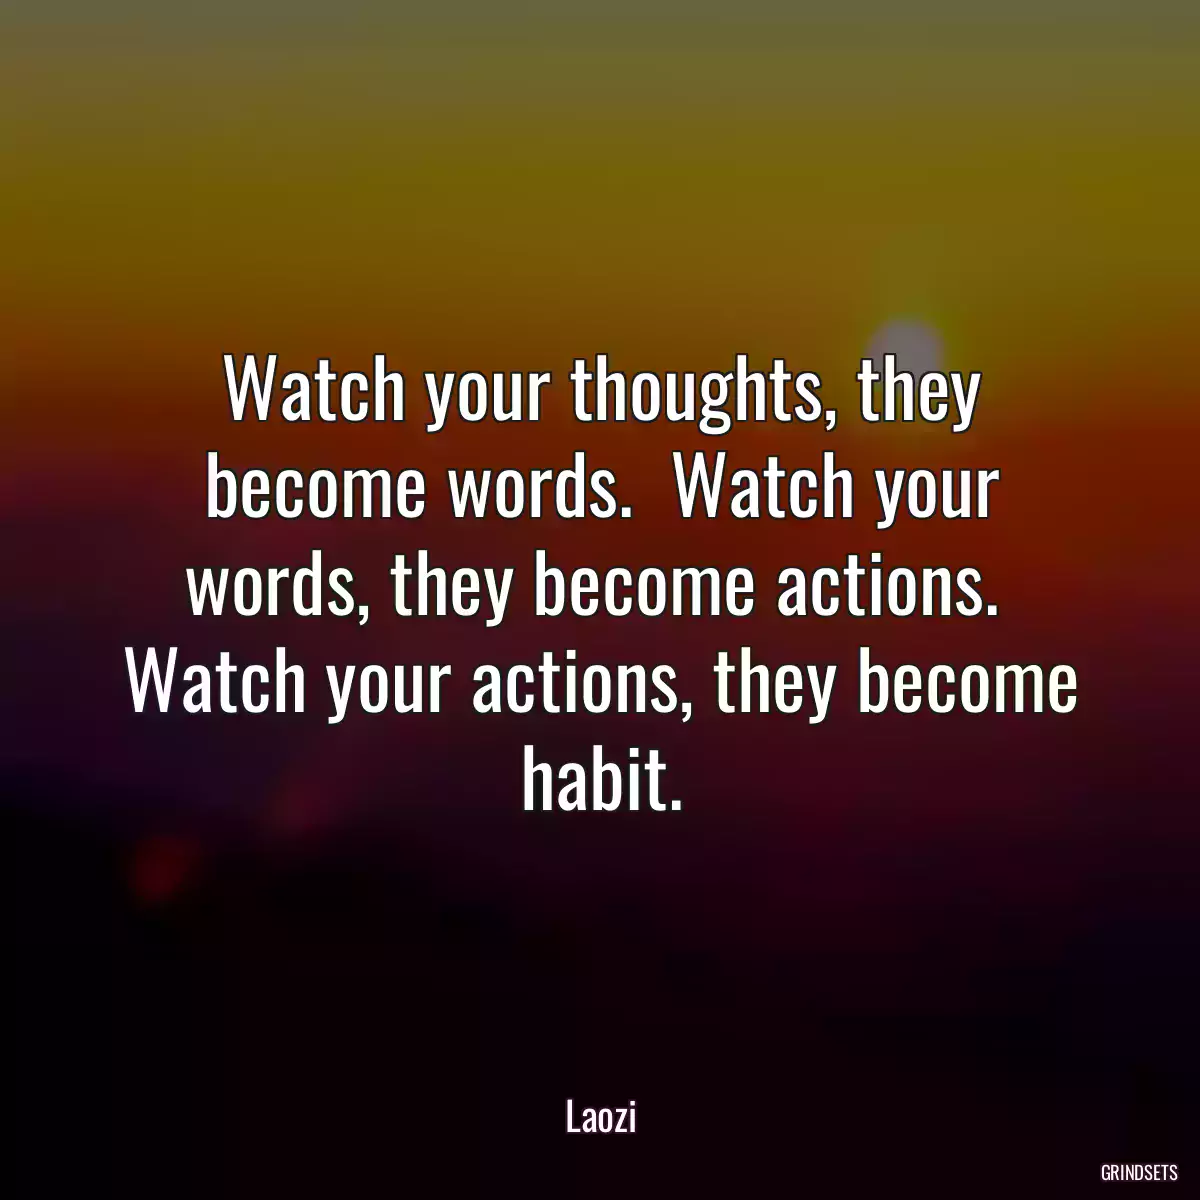 Watch your thoughts, they become words.  Watch your words, they become actions.  Watch your actions, they become habit.